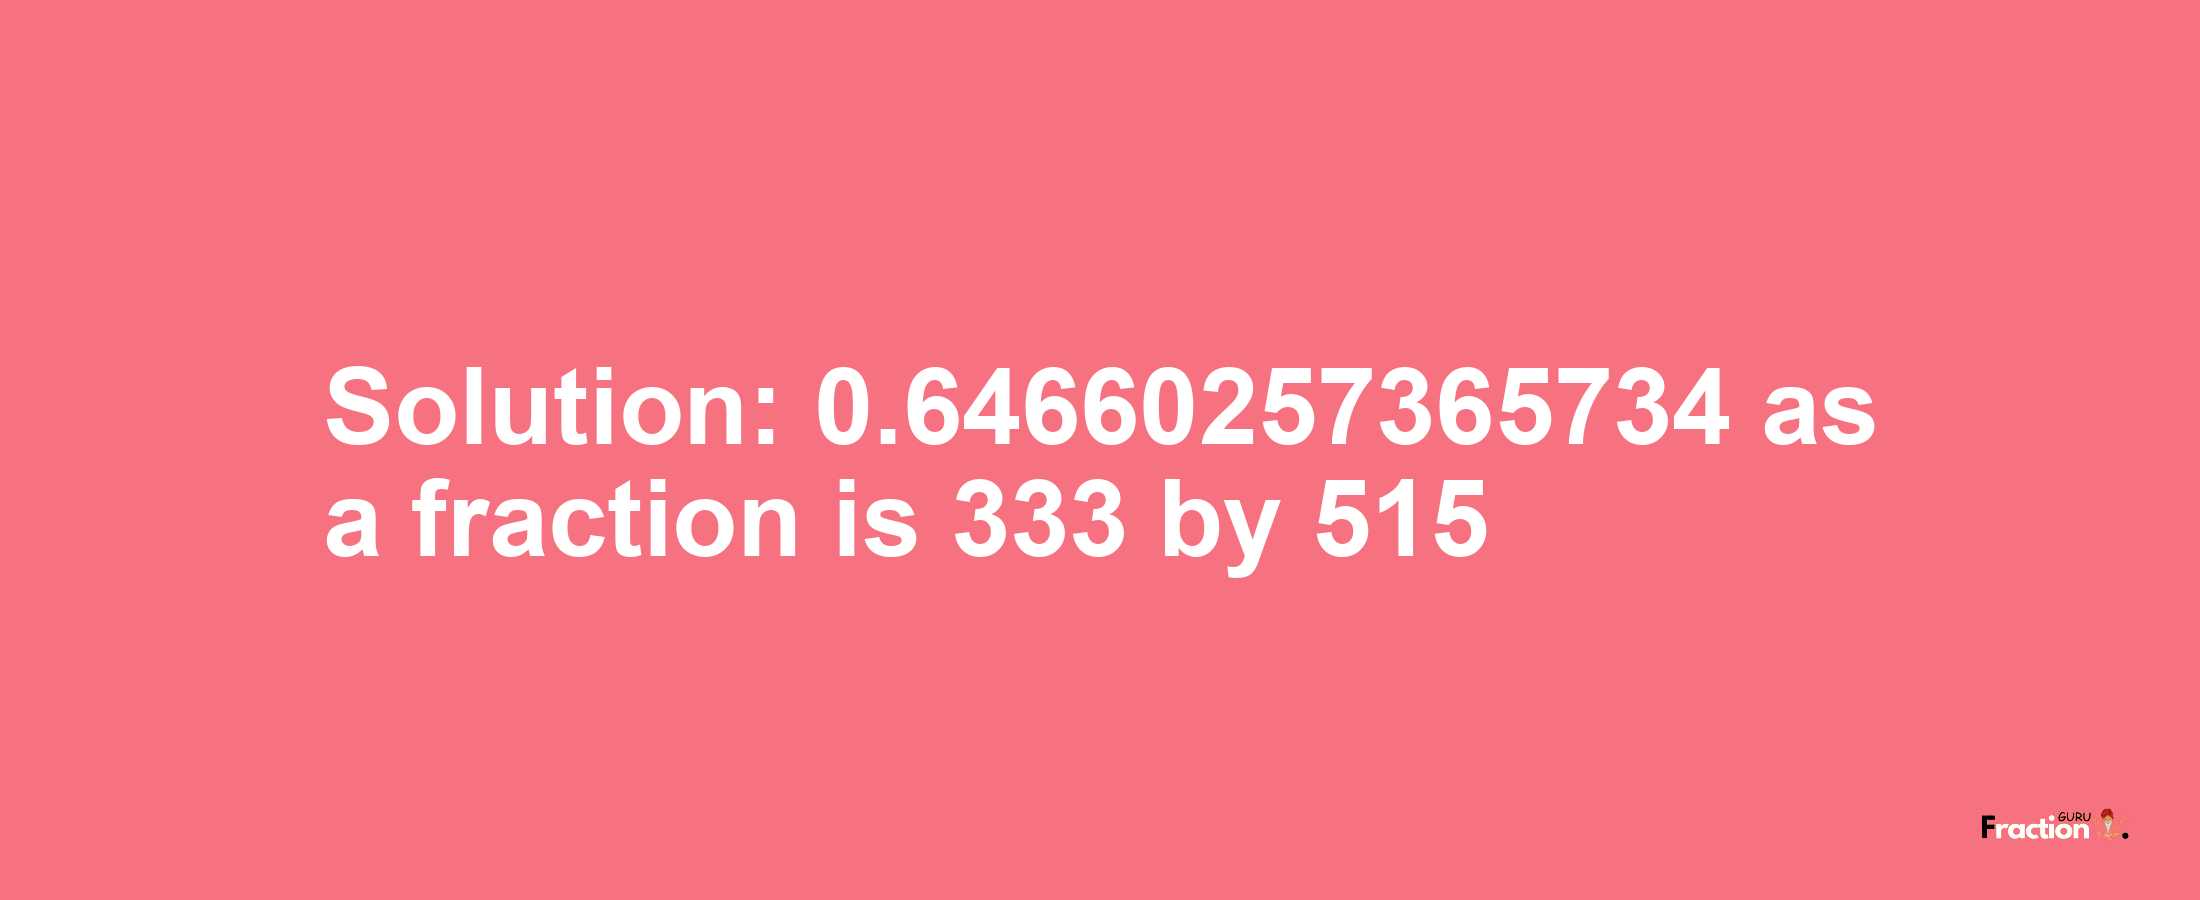 Solution:0.64660257365734 as a fraction is 333/515